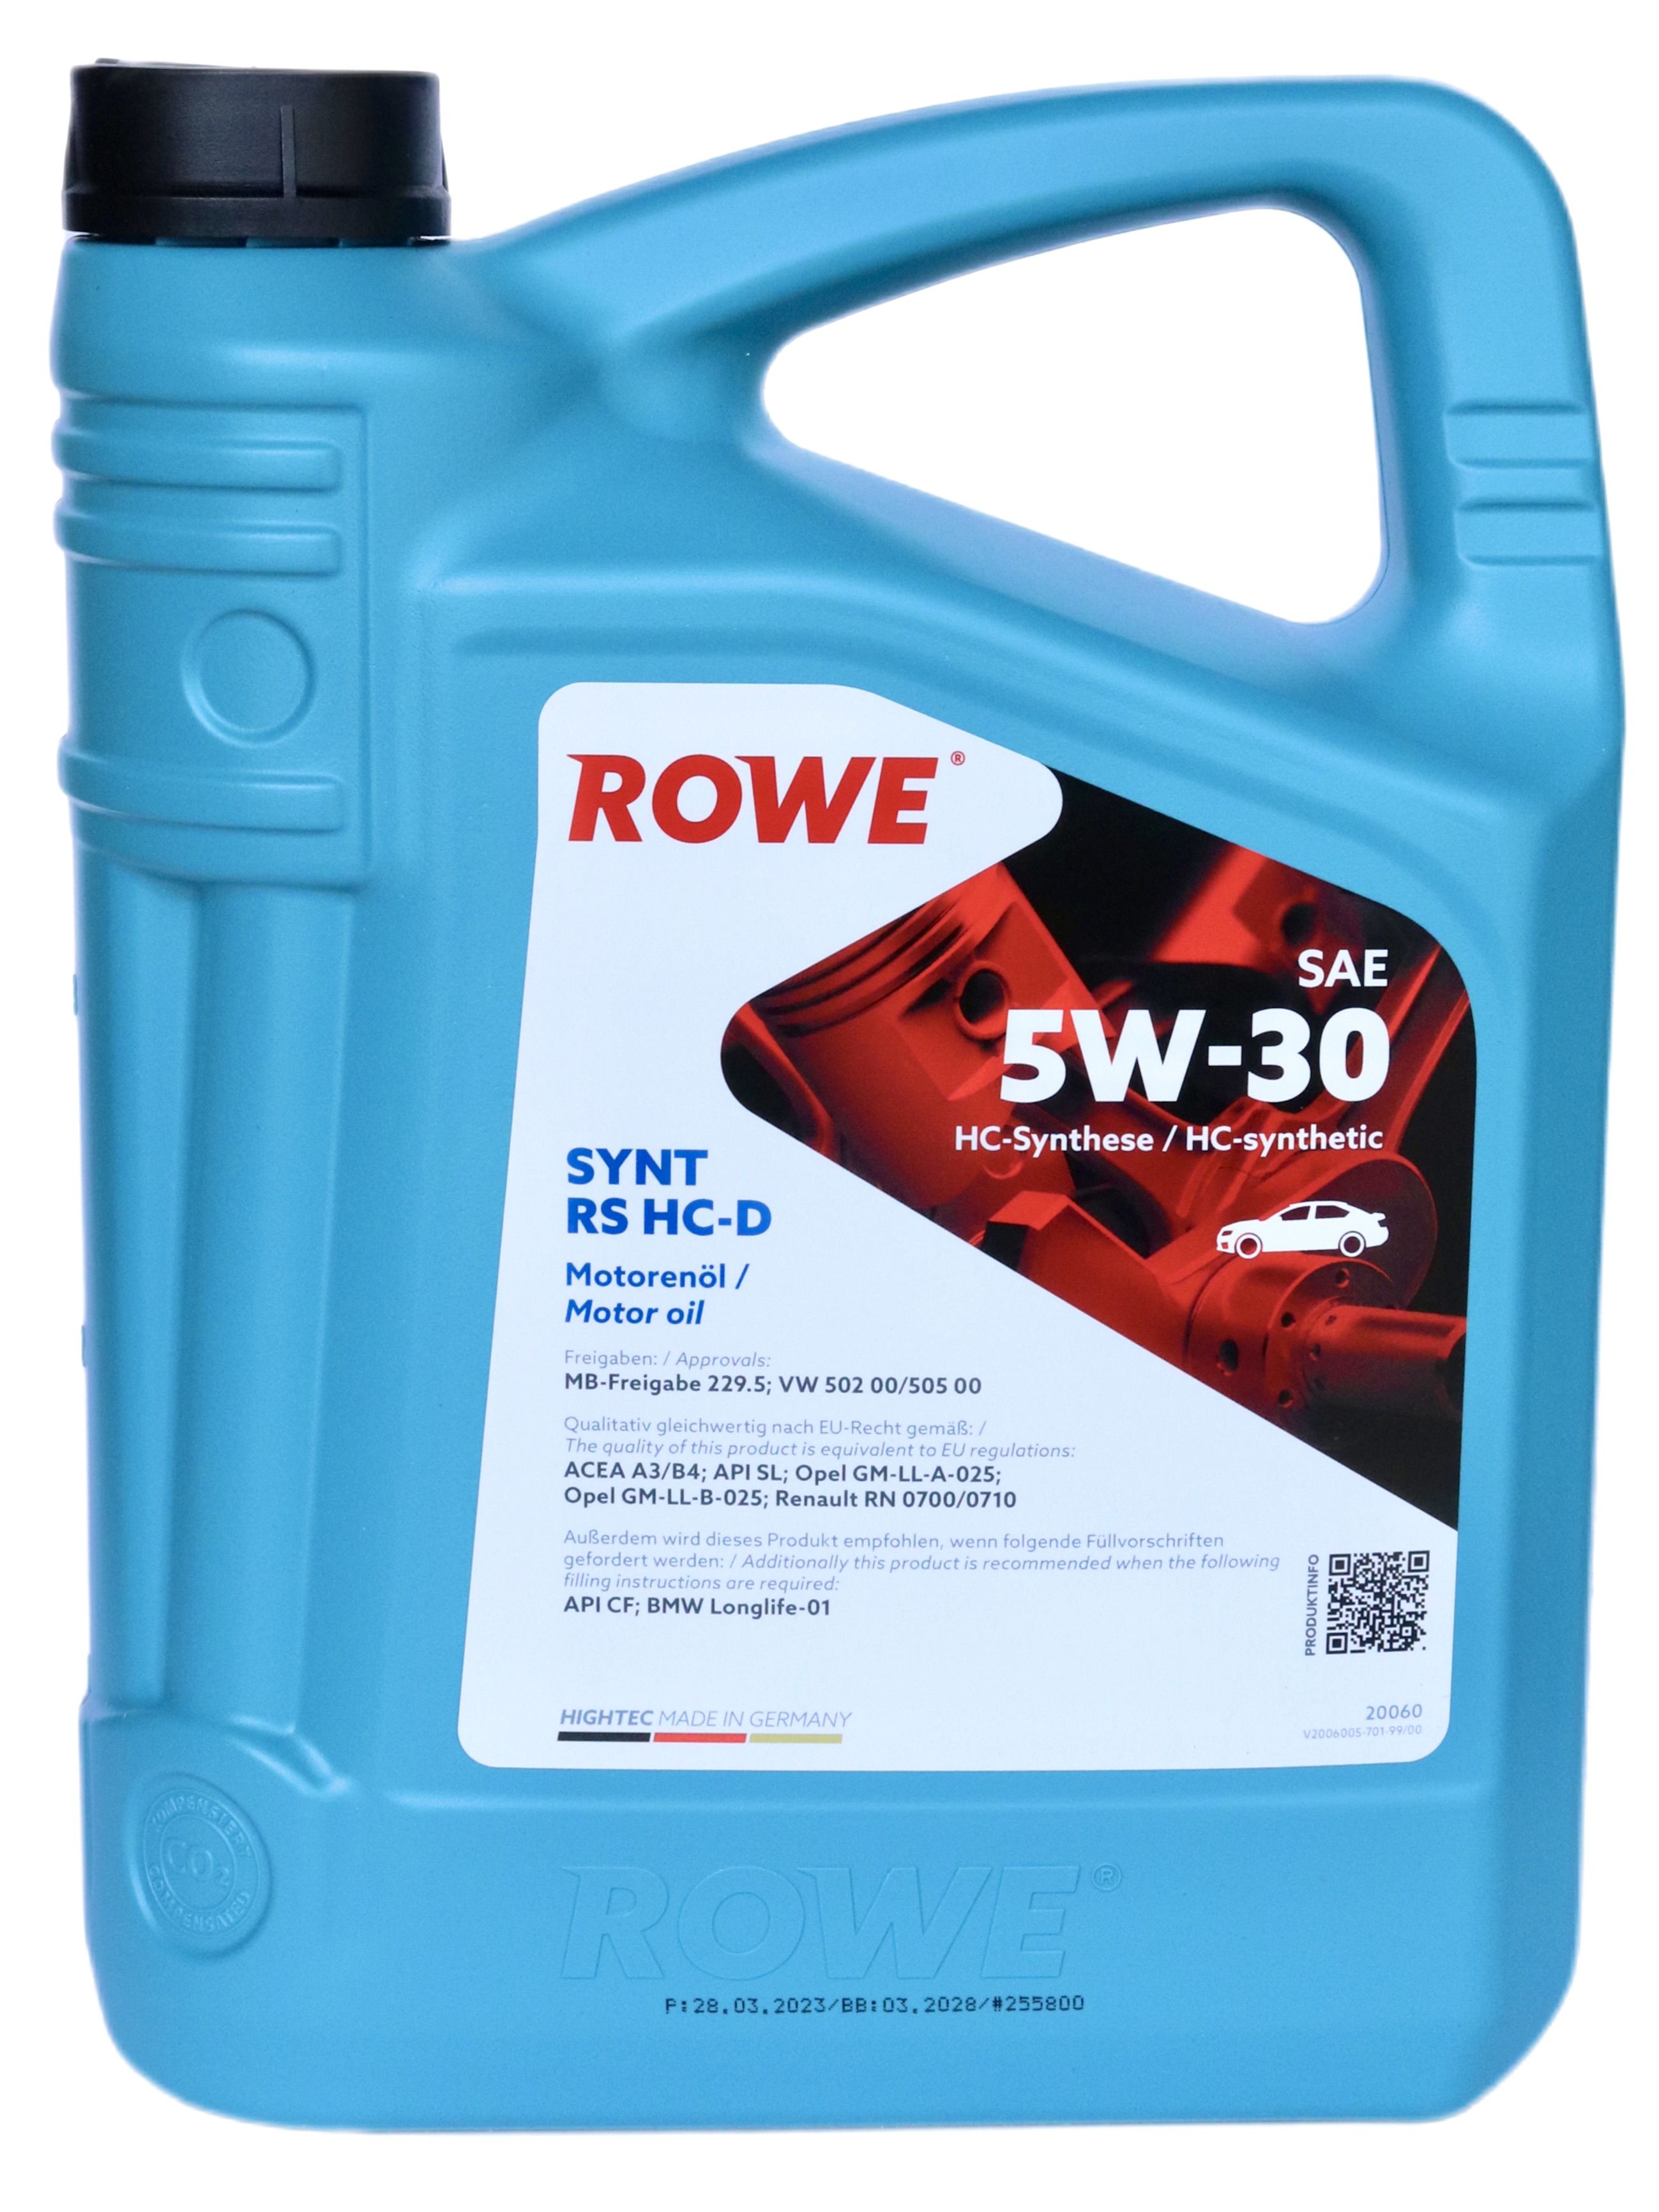 Моторное масло Rowe Hightec Multi Synt DPF SAE 5w-30. Rowe 5w30 RS DLS. Rowe DPF 5w-30 масло. Масло Rowe Hightec Synt RSI 5w40. Масло rowe rs